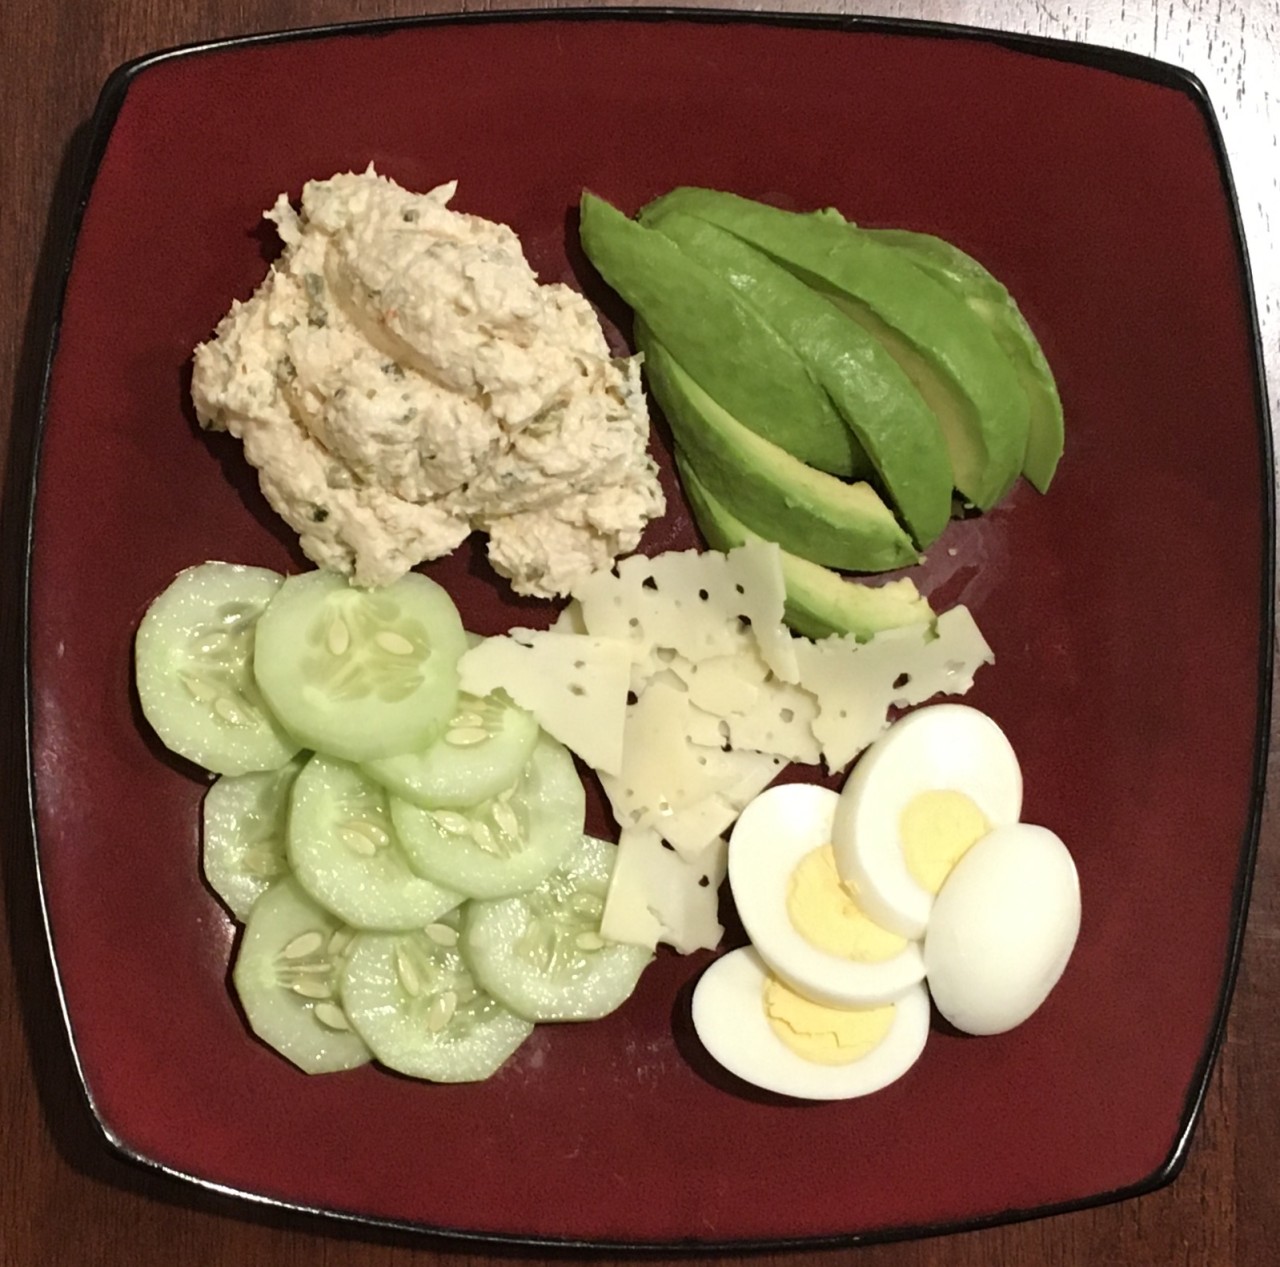 <a class="bx-tag" rel="tag" href="https://streetloc.com/view-channel-profile/whatsforlunch"><s>#</s><b>whatsforlunch</b></a> Chicken Salad, Avocado, Boiled Egg, Cucumber, Swiss Cheese